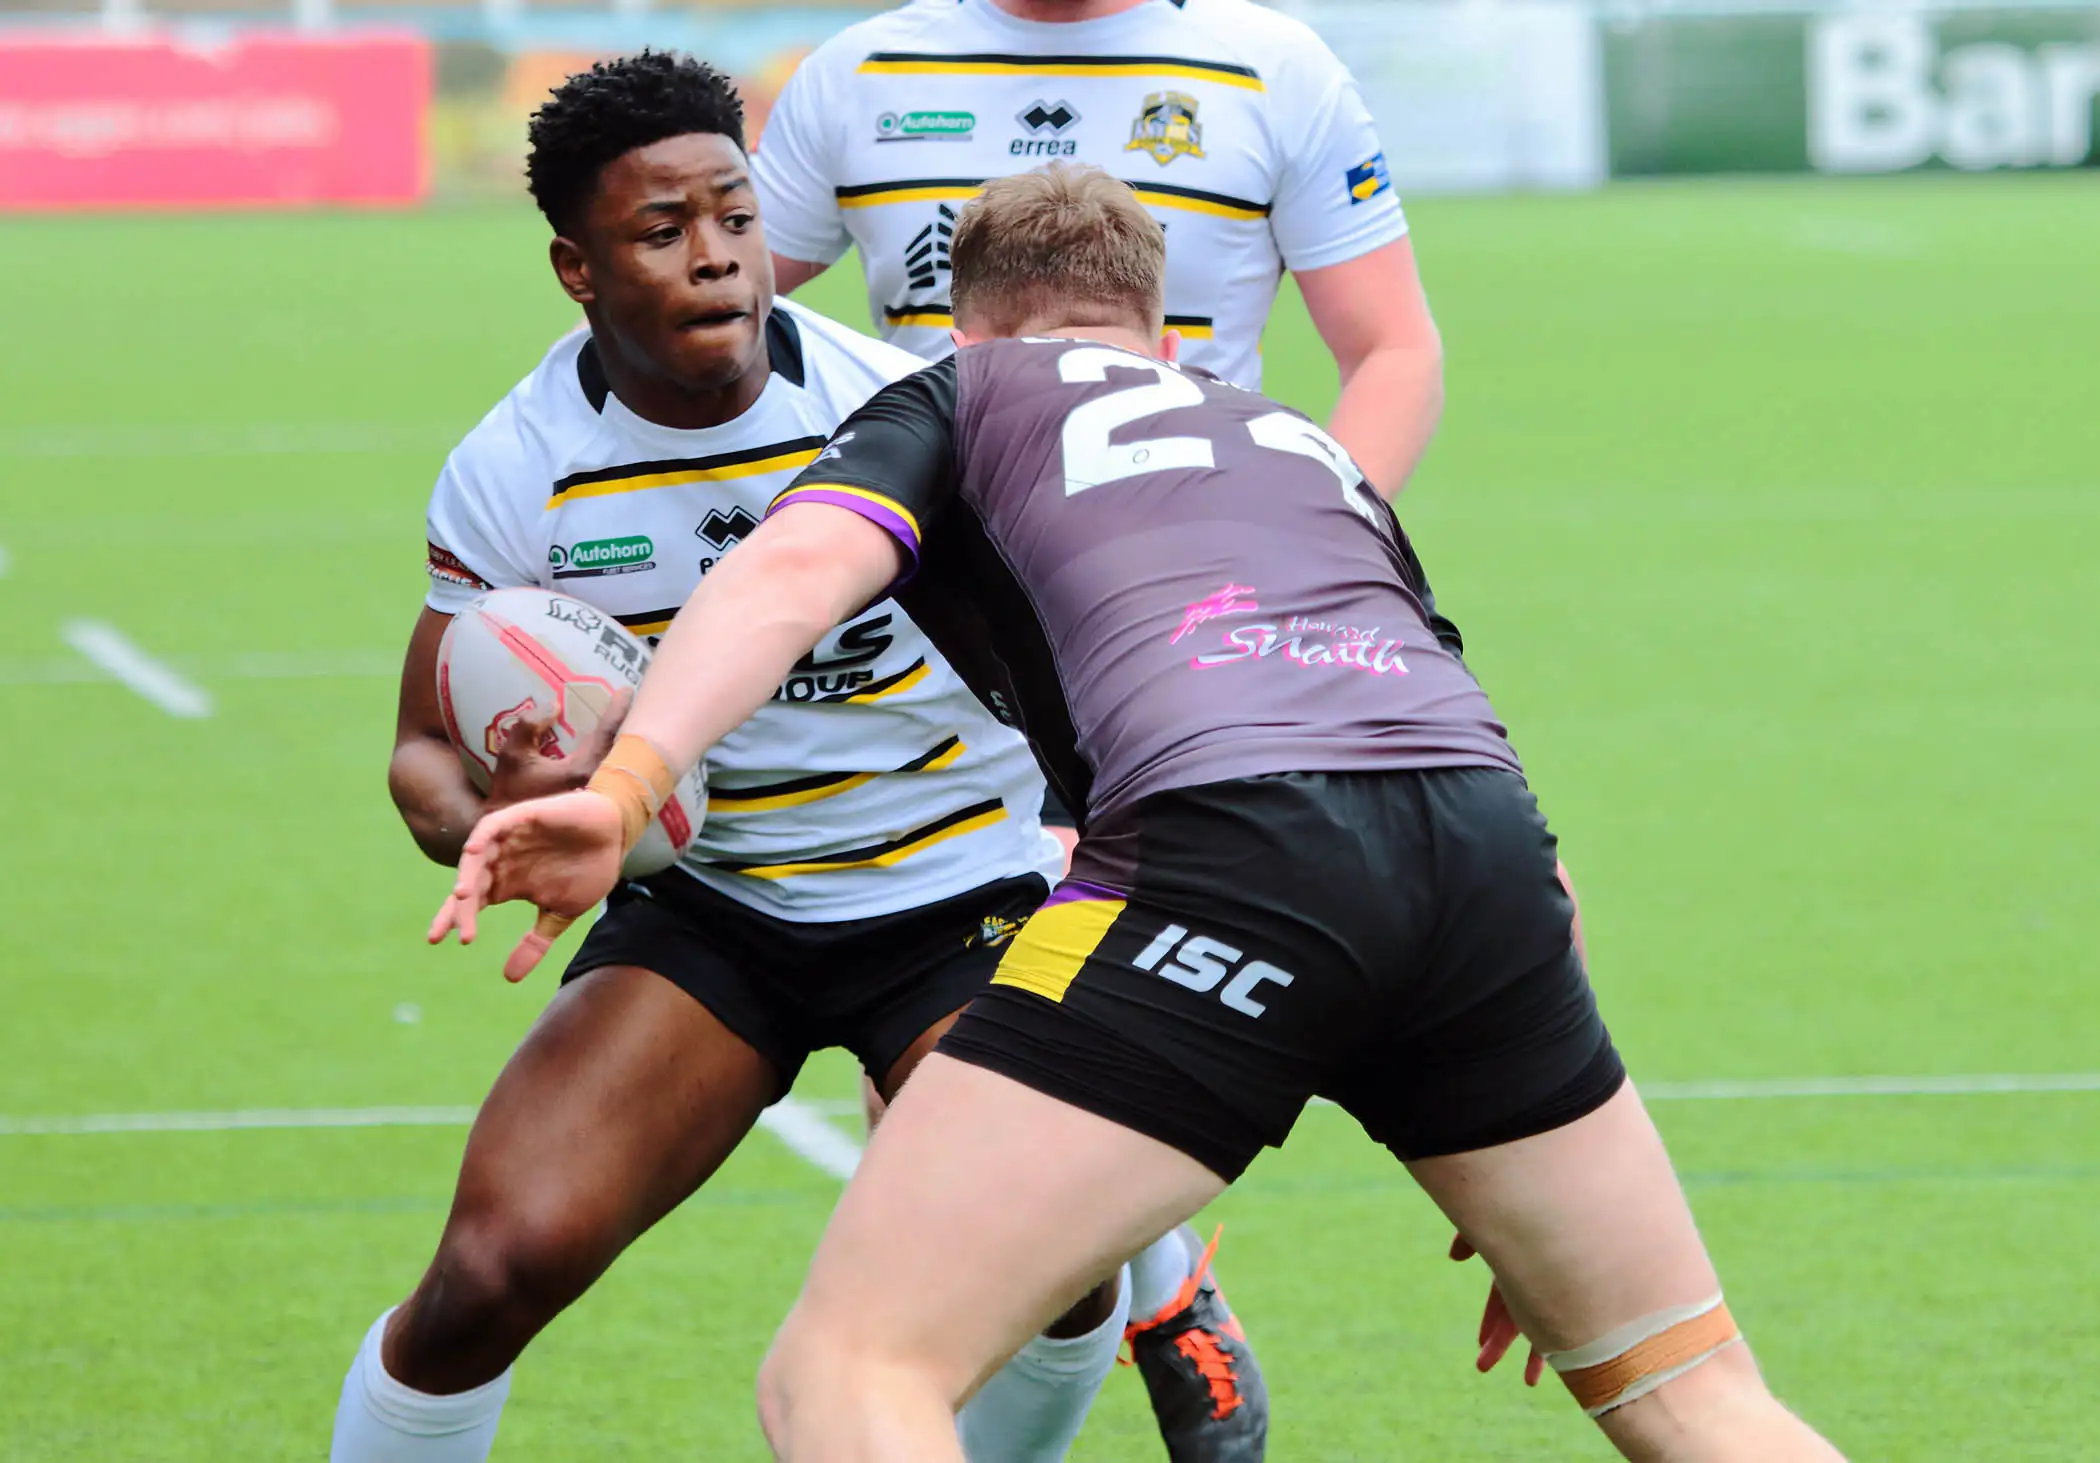 League 1 round-up: Hitchcox debut, Whitehaven run riot, Mazive shines for York